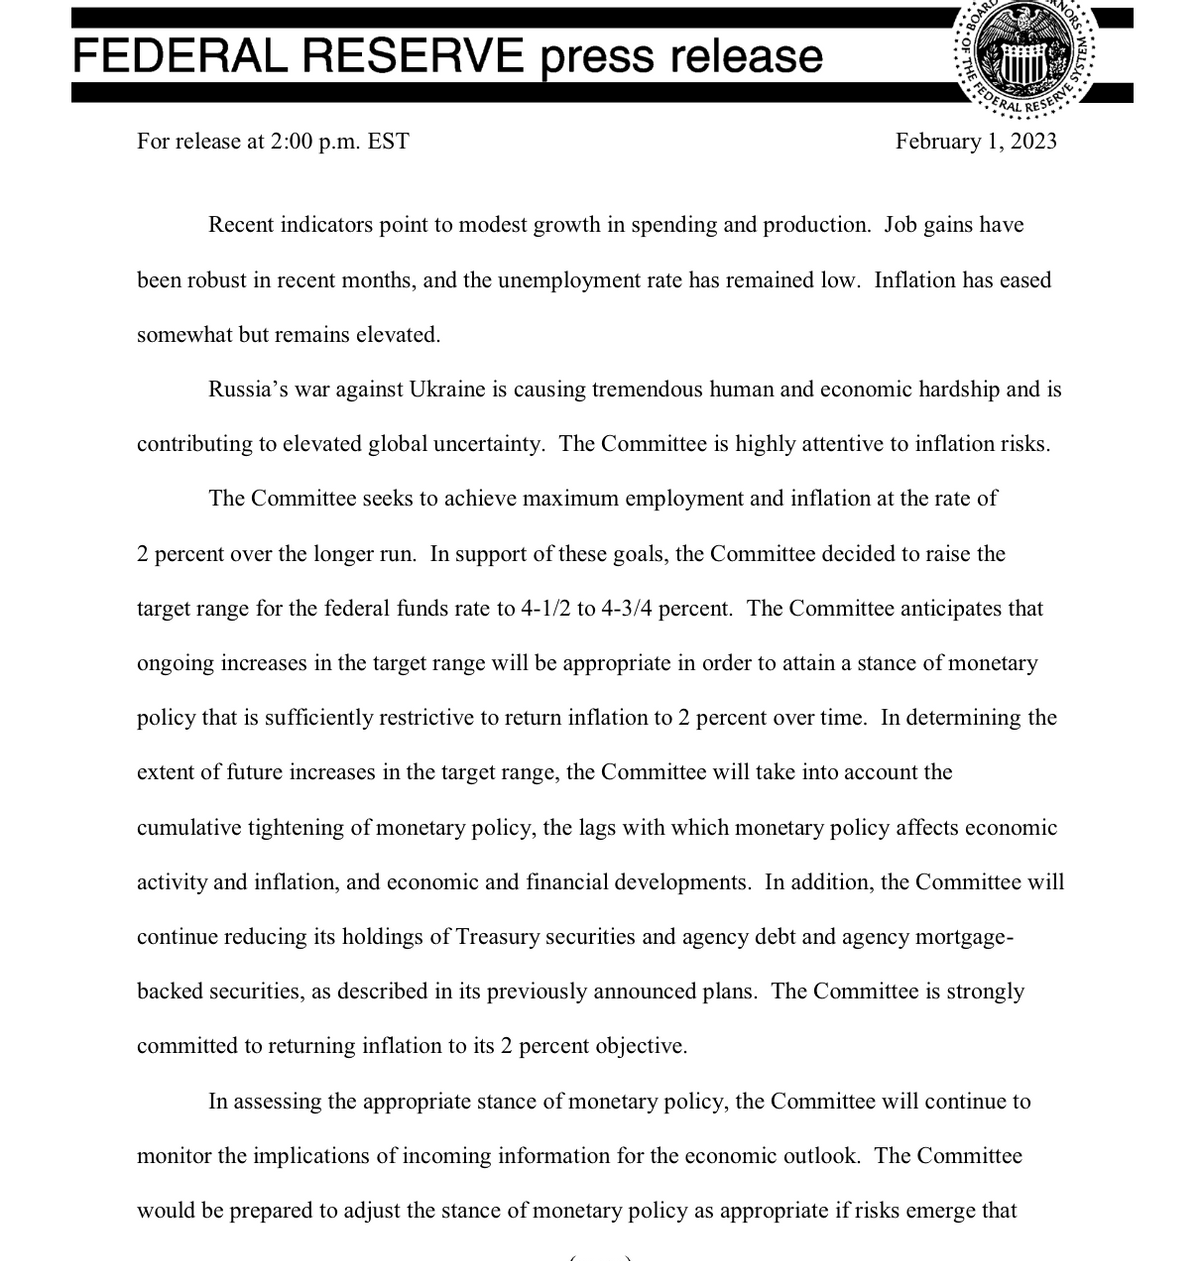 FEDERAL RESERVE press release
For release at 2:00 p.m. EST
F
FEDERAL DESERVES
February 1, 2023
Recent indicators point to modest growth in spending and production. Job gains have
been robust in recent months, and the unemployment rate has remained low. Inflation has eased
somewhat but remains elevated.
LAS
Russia's war against Ukraine is causing tremendous human and economic hardship and is
contributing to elevated global uncertainty. The Committee is highly attentive to inflation risks.
The Committee seeks to achieve maximum employment and inflation at the rate of
2 percent over the longer run. In support of these goals, the Committee decided to raise the
target range for the federal funds rate to 4-1/2 to 4-3/4 percent. The Committee anticipates that
ongoing increases in the target range will be appropriate in order to attain a stance of monetary
policy that is sufficiently restrictive to return inflation to 2 percent over time. In determining the
extent of future increases in the target range, the Committee will take into account the
cumulative tightening of monetary policy, the lags with which monetary policy affects economic
activity and inflation, and economic and financial developments. In addition, the Committee will
continue reducing its holdings of Treasury securities and agency debt and agency mortgage-
backed securities, as described in its previously announced plans. The Committee is strongly
committed to returning inflation to its 2 percent objective.
In assessing the appropriate stance of monetary policy, the Committee will continue to
monitor the implications of incoming information for the economic outlook. The Committee
would be prepared to adjust the stance of monetary policy as appropriate if risks emerge that